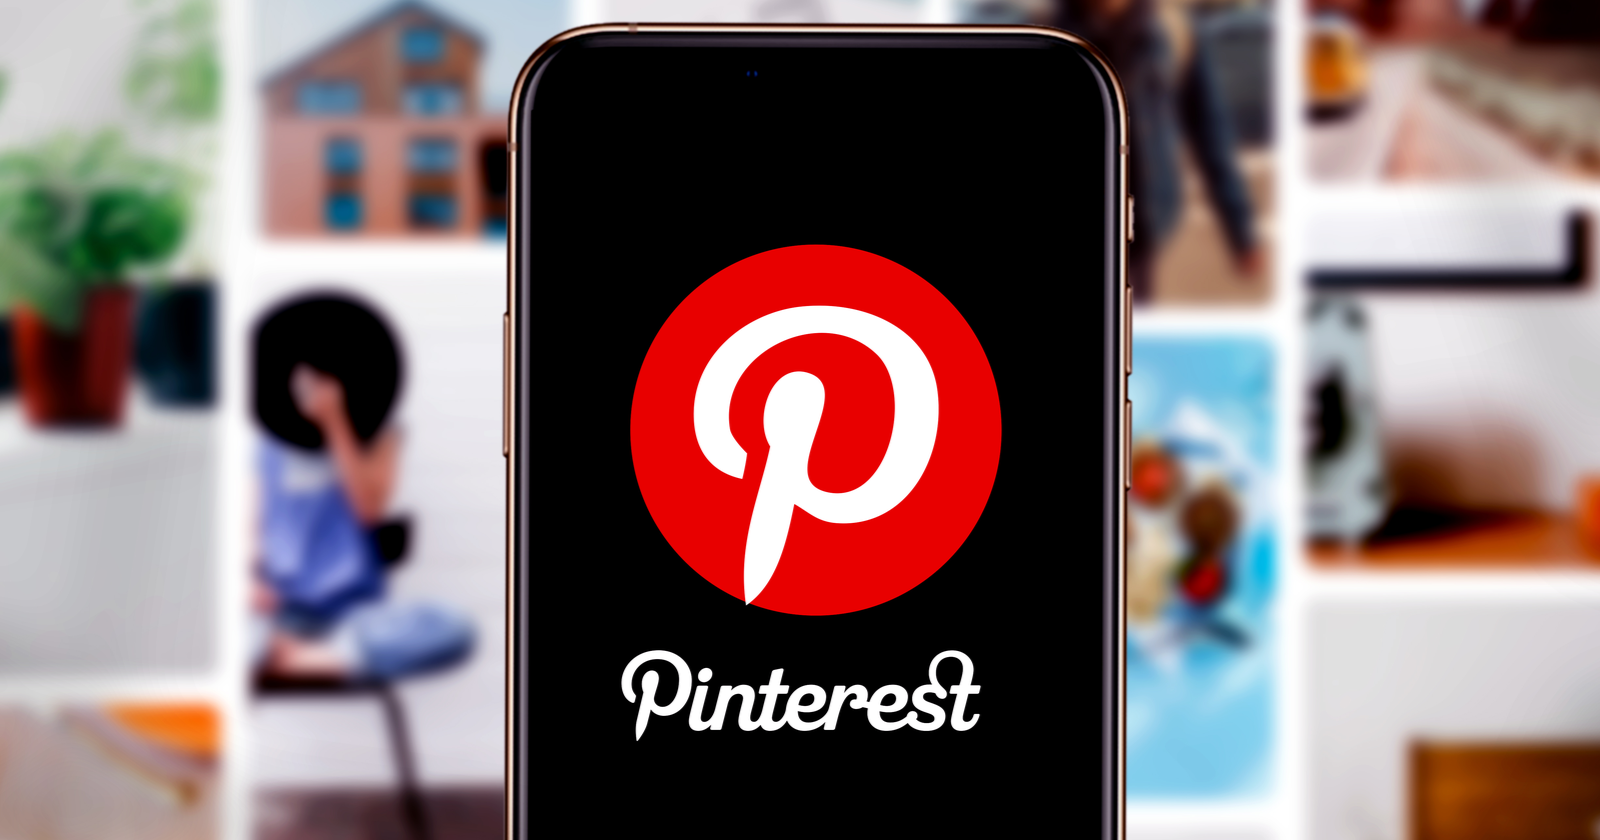 https://www.searchenginejournal.com/wp-content/uploads/2020/05/25-things-you-need-to-know-about-pinterest-5efe2753326f4.png